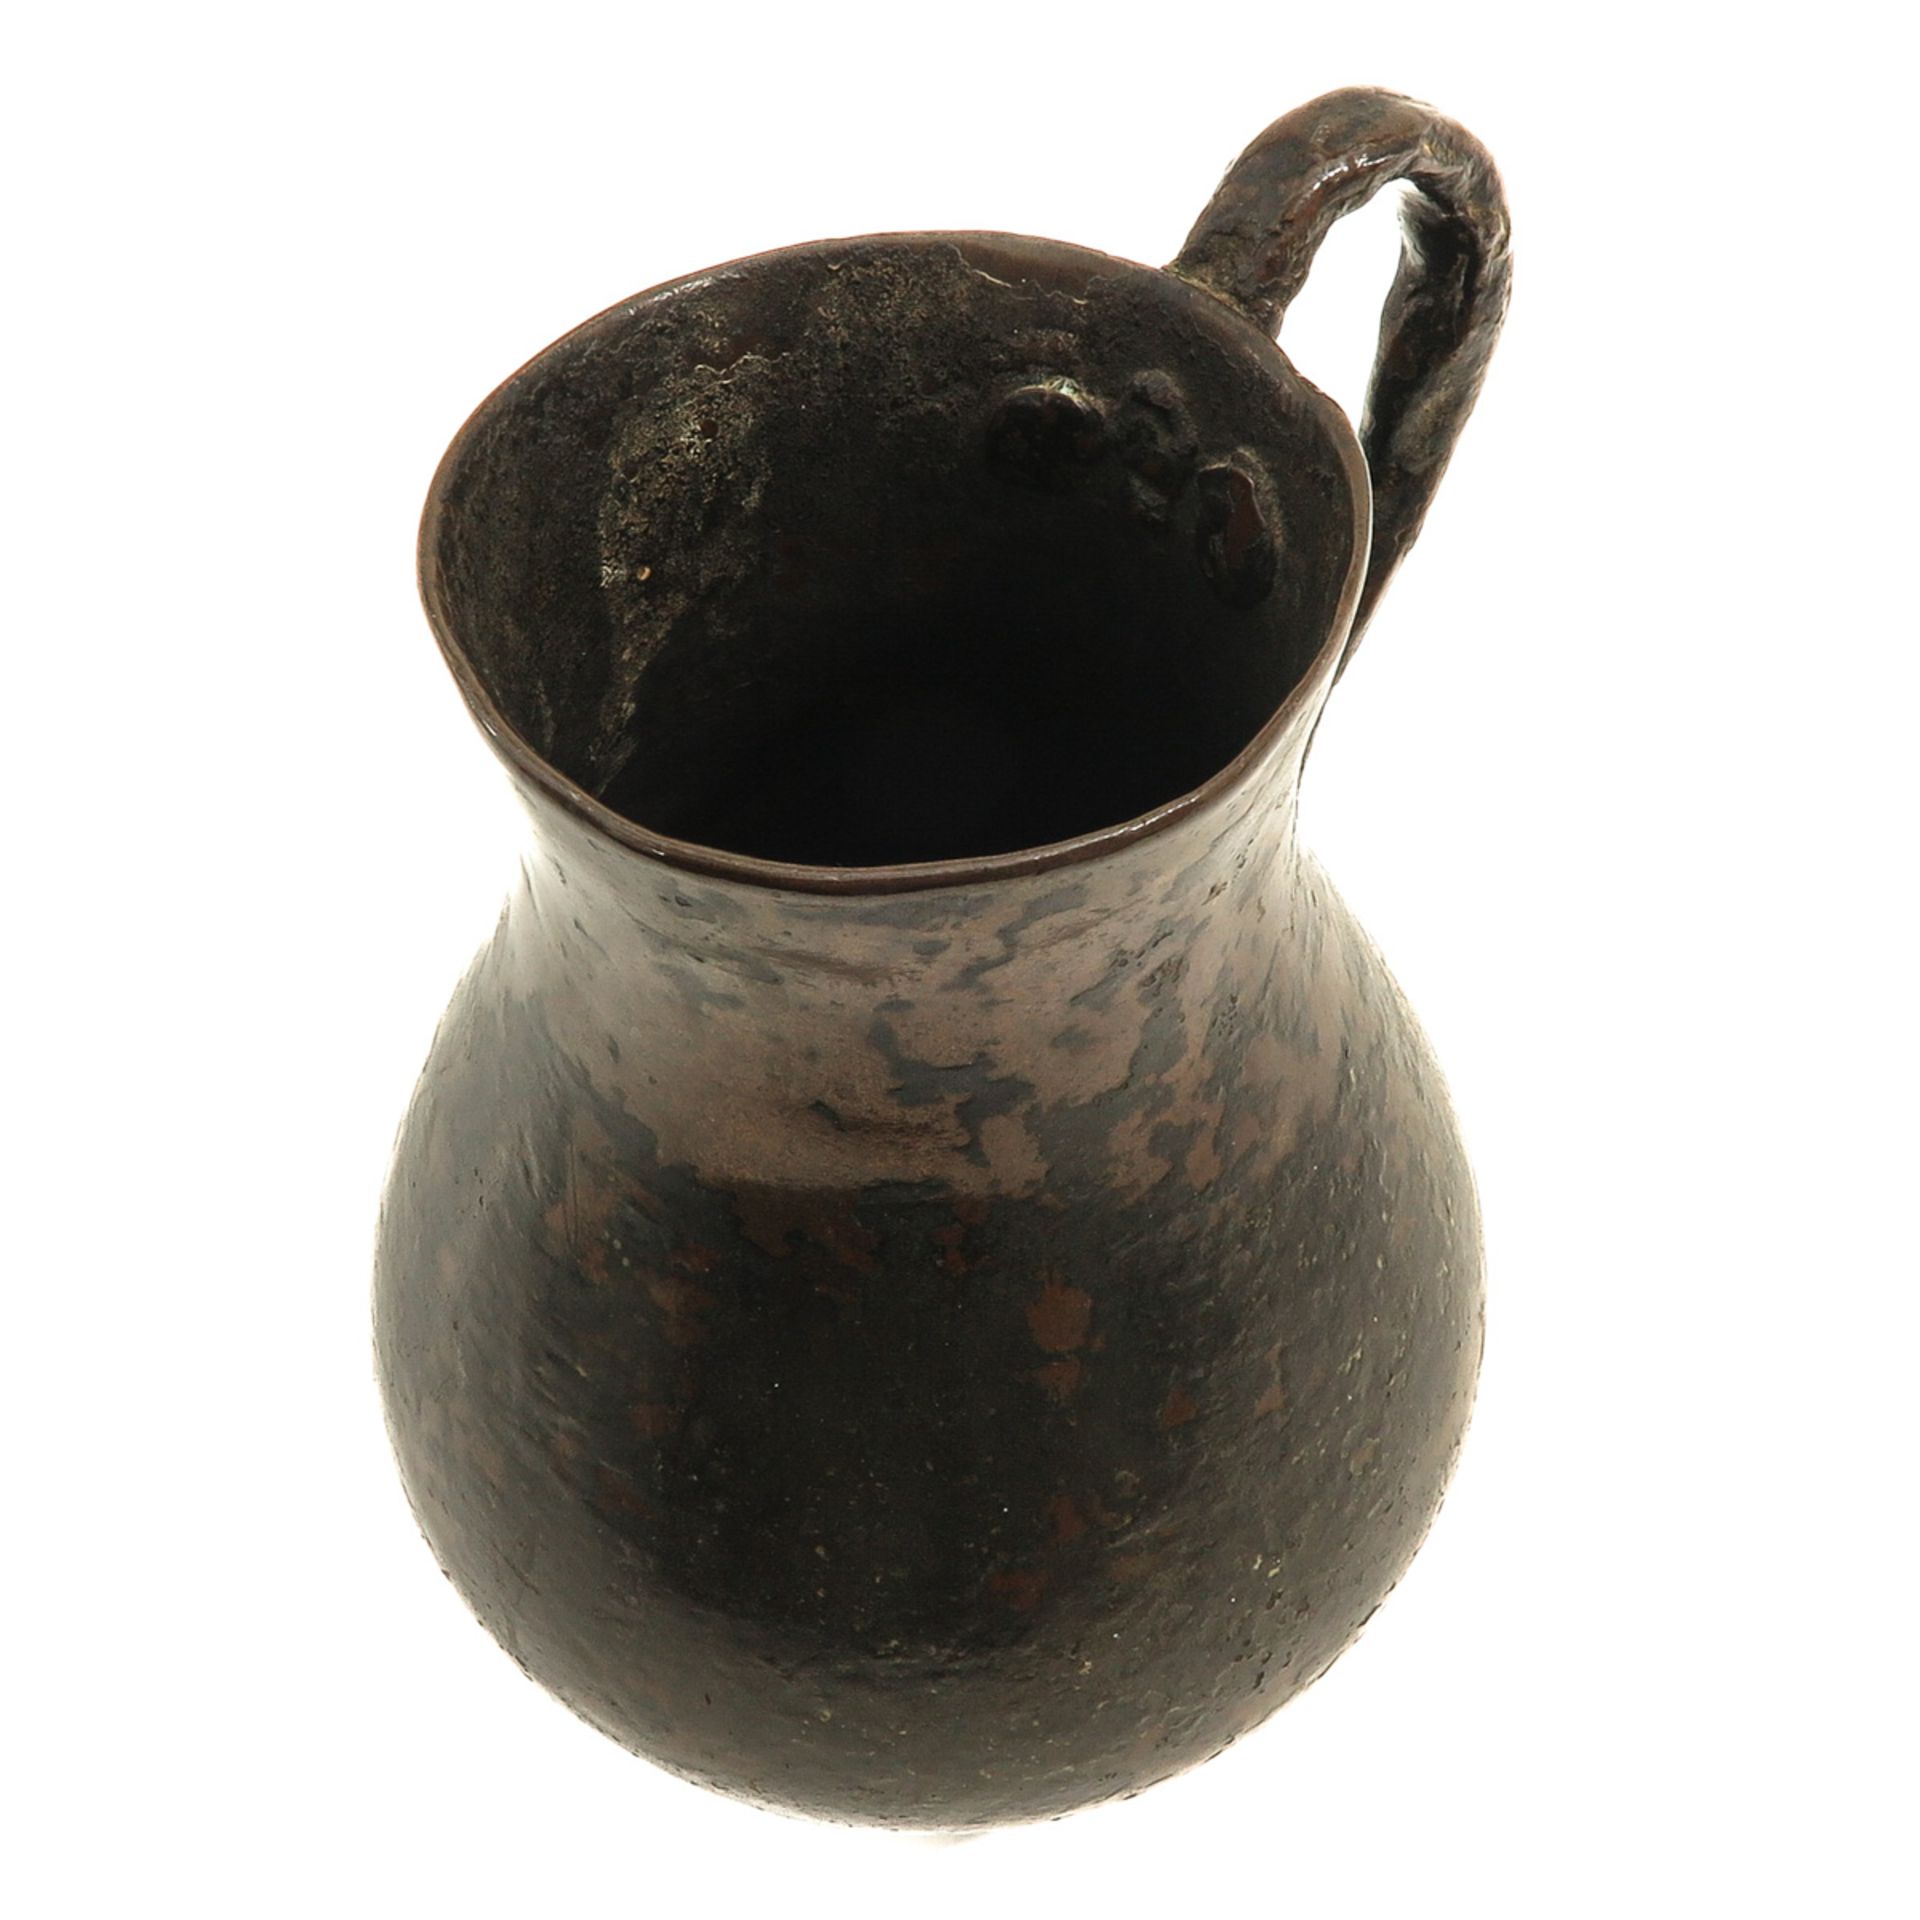 A 14th Century Bronze Measuring Cup - Image 8 of 9